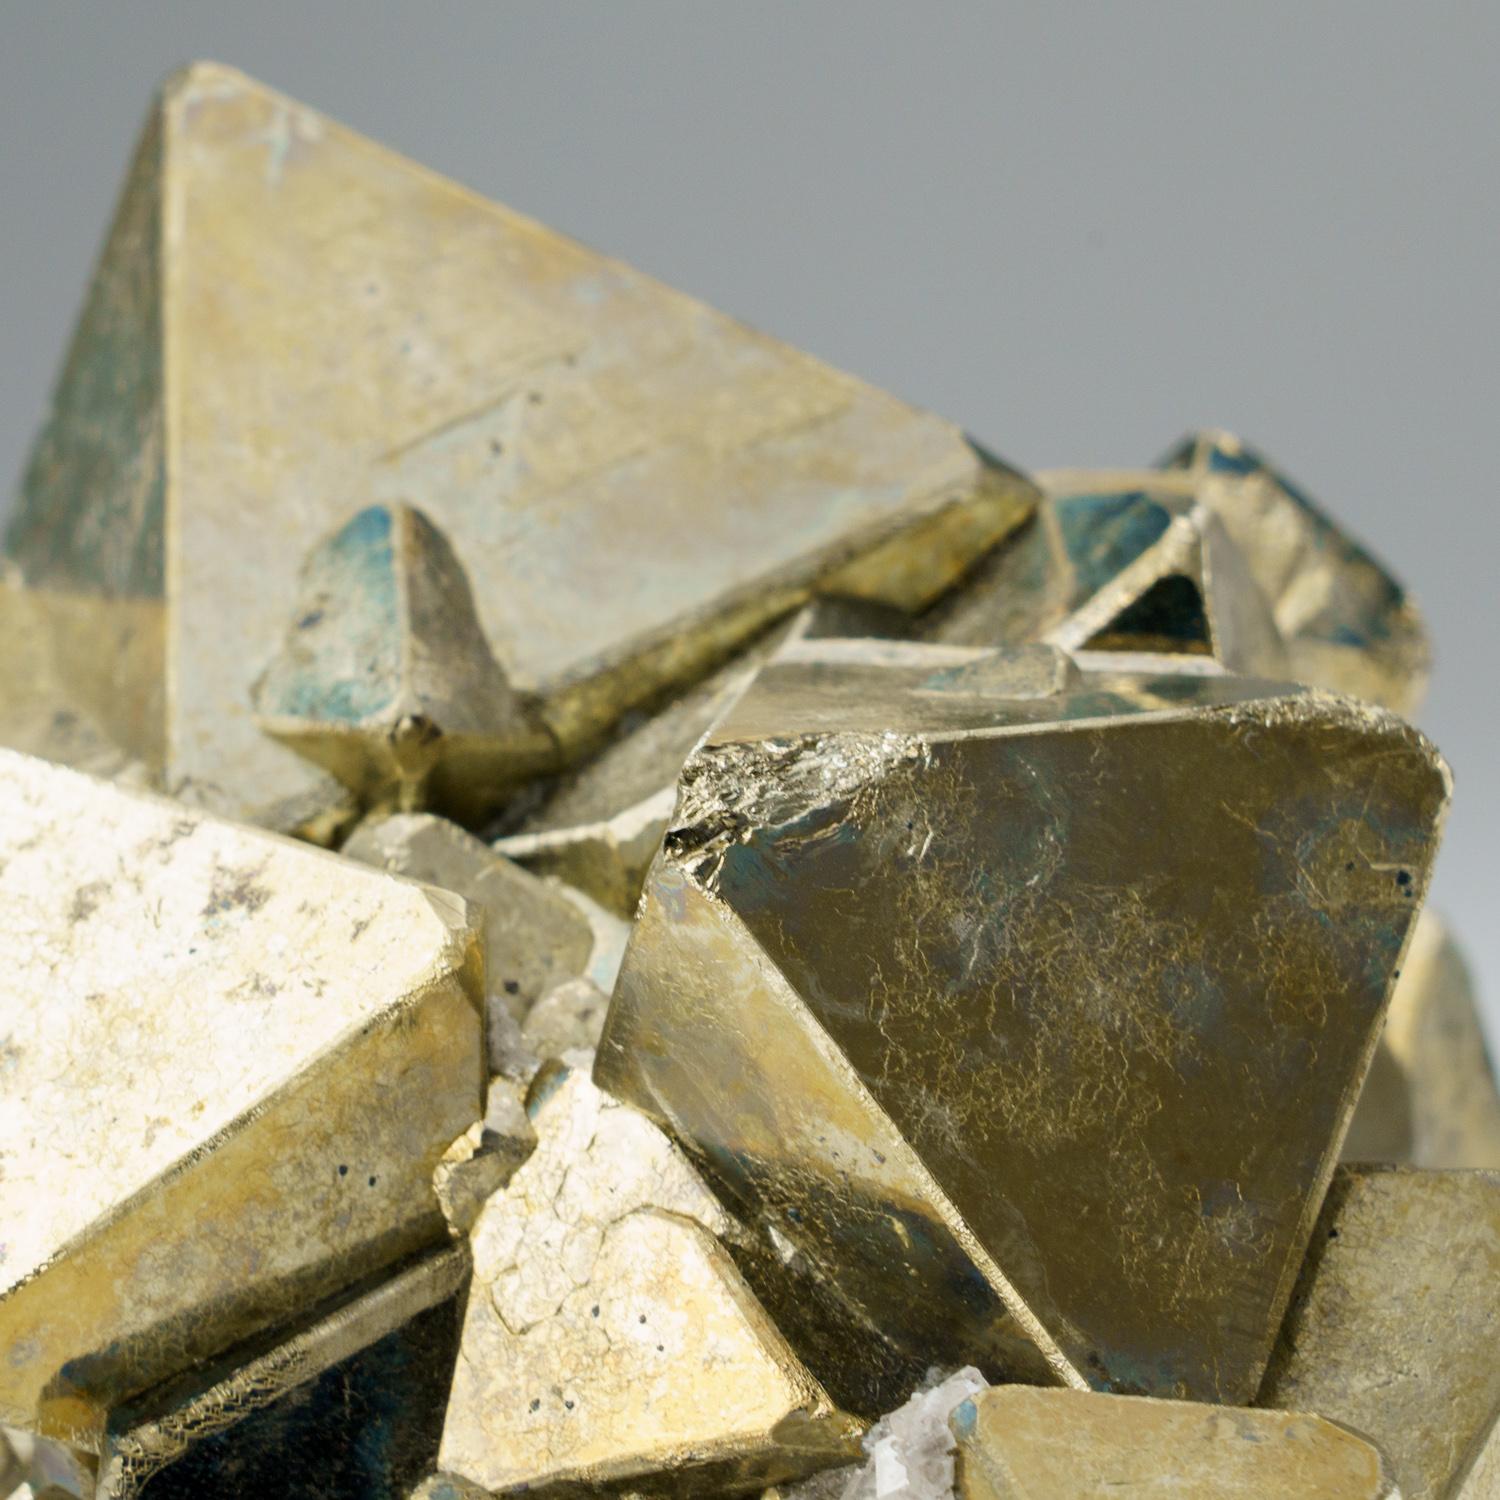 A classic and very attractive specimen of Pyrite from Peru. Brilliant crystals of metallic pyrite on a pyrite matrix. The pyrite crystals have excellent surface luster and have small cubic and dodecahedral faces on the edges and corners.

Weight: